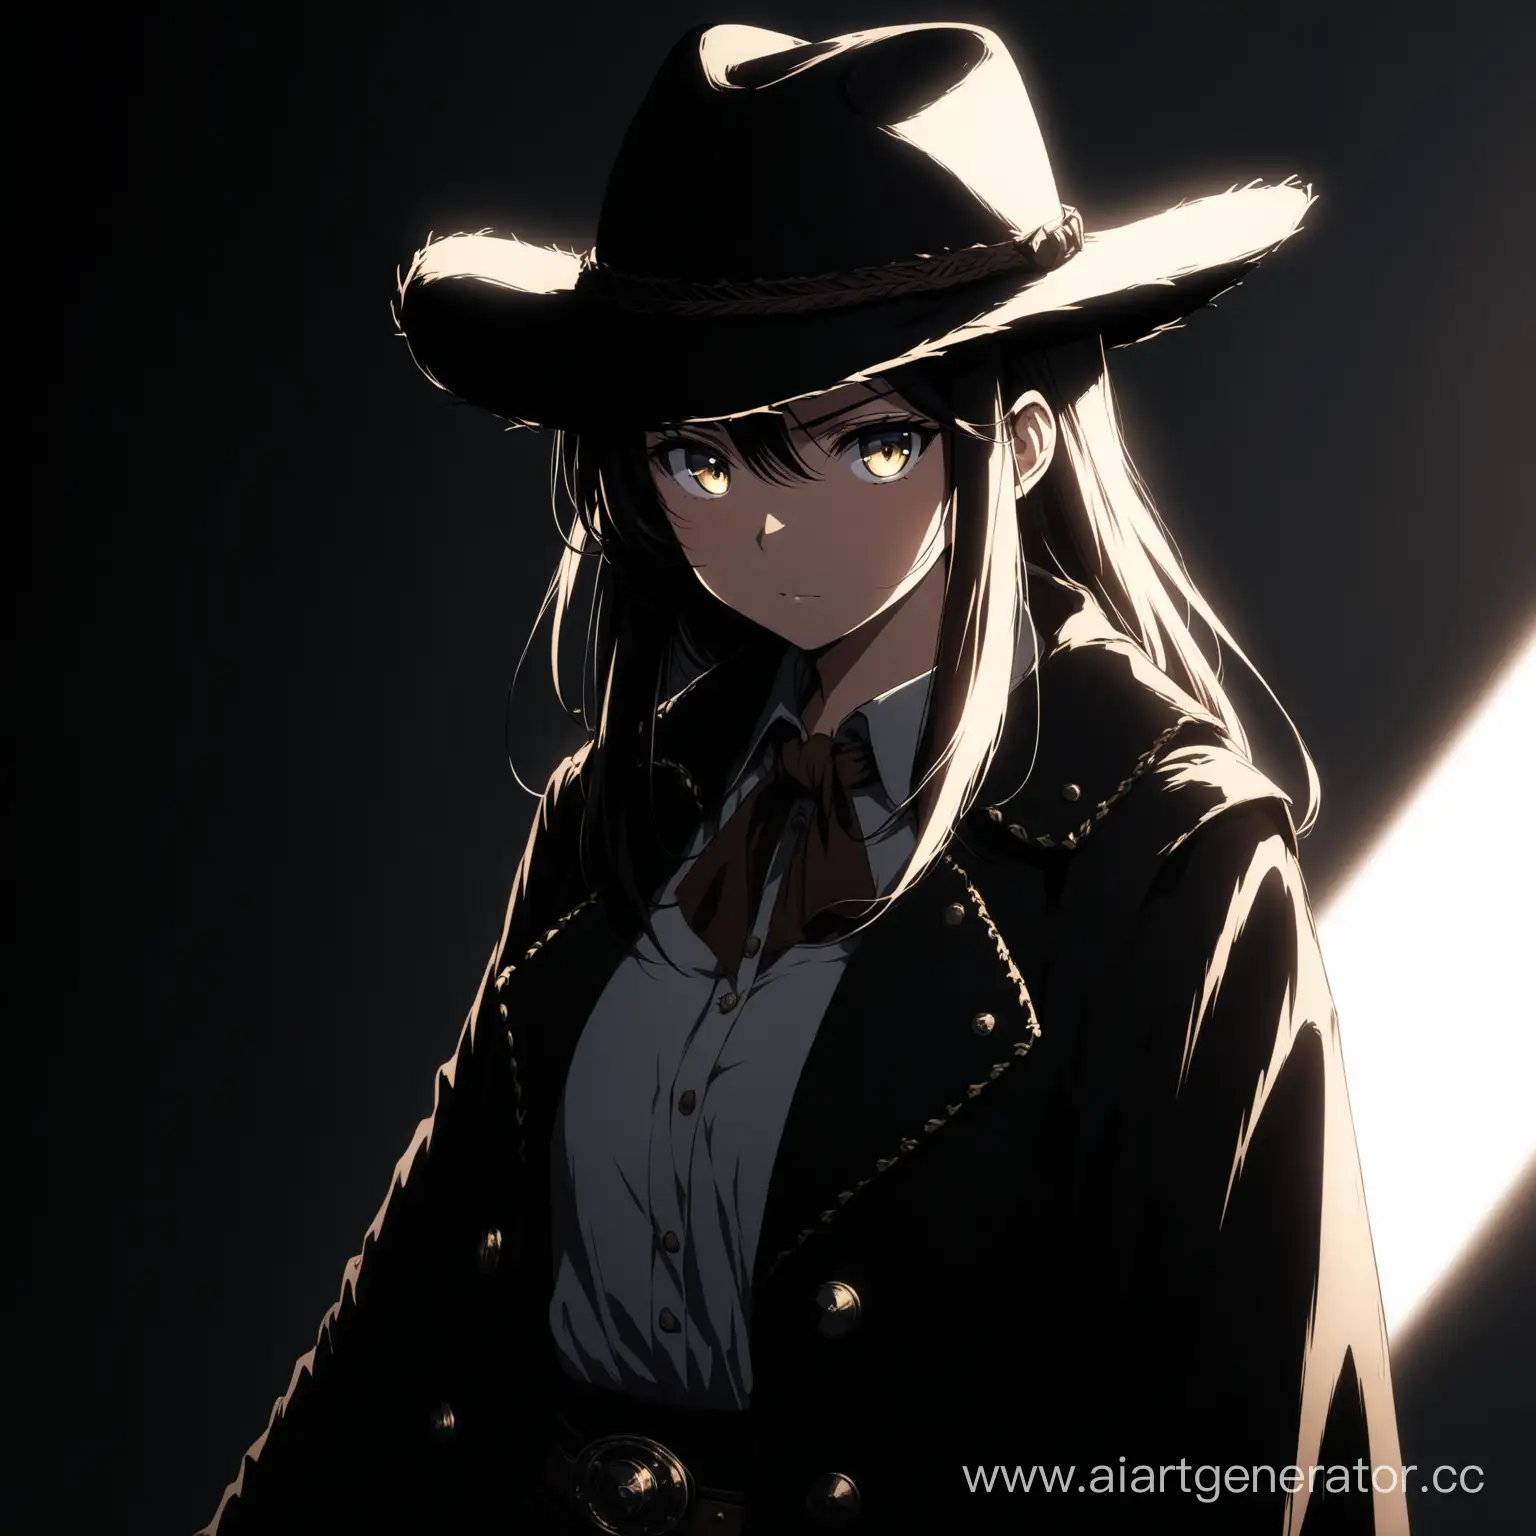 anime girl see in the frame, detail eyes, detail clothes, a cowboy hat There are a lot of weapons on his clothes, a black coat. detail light and shadows, western film style